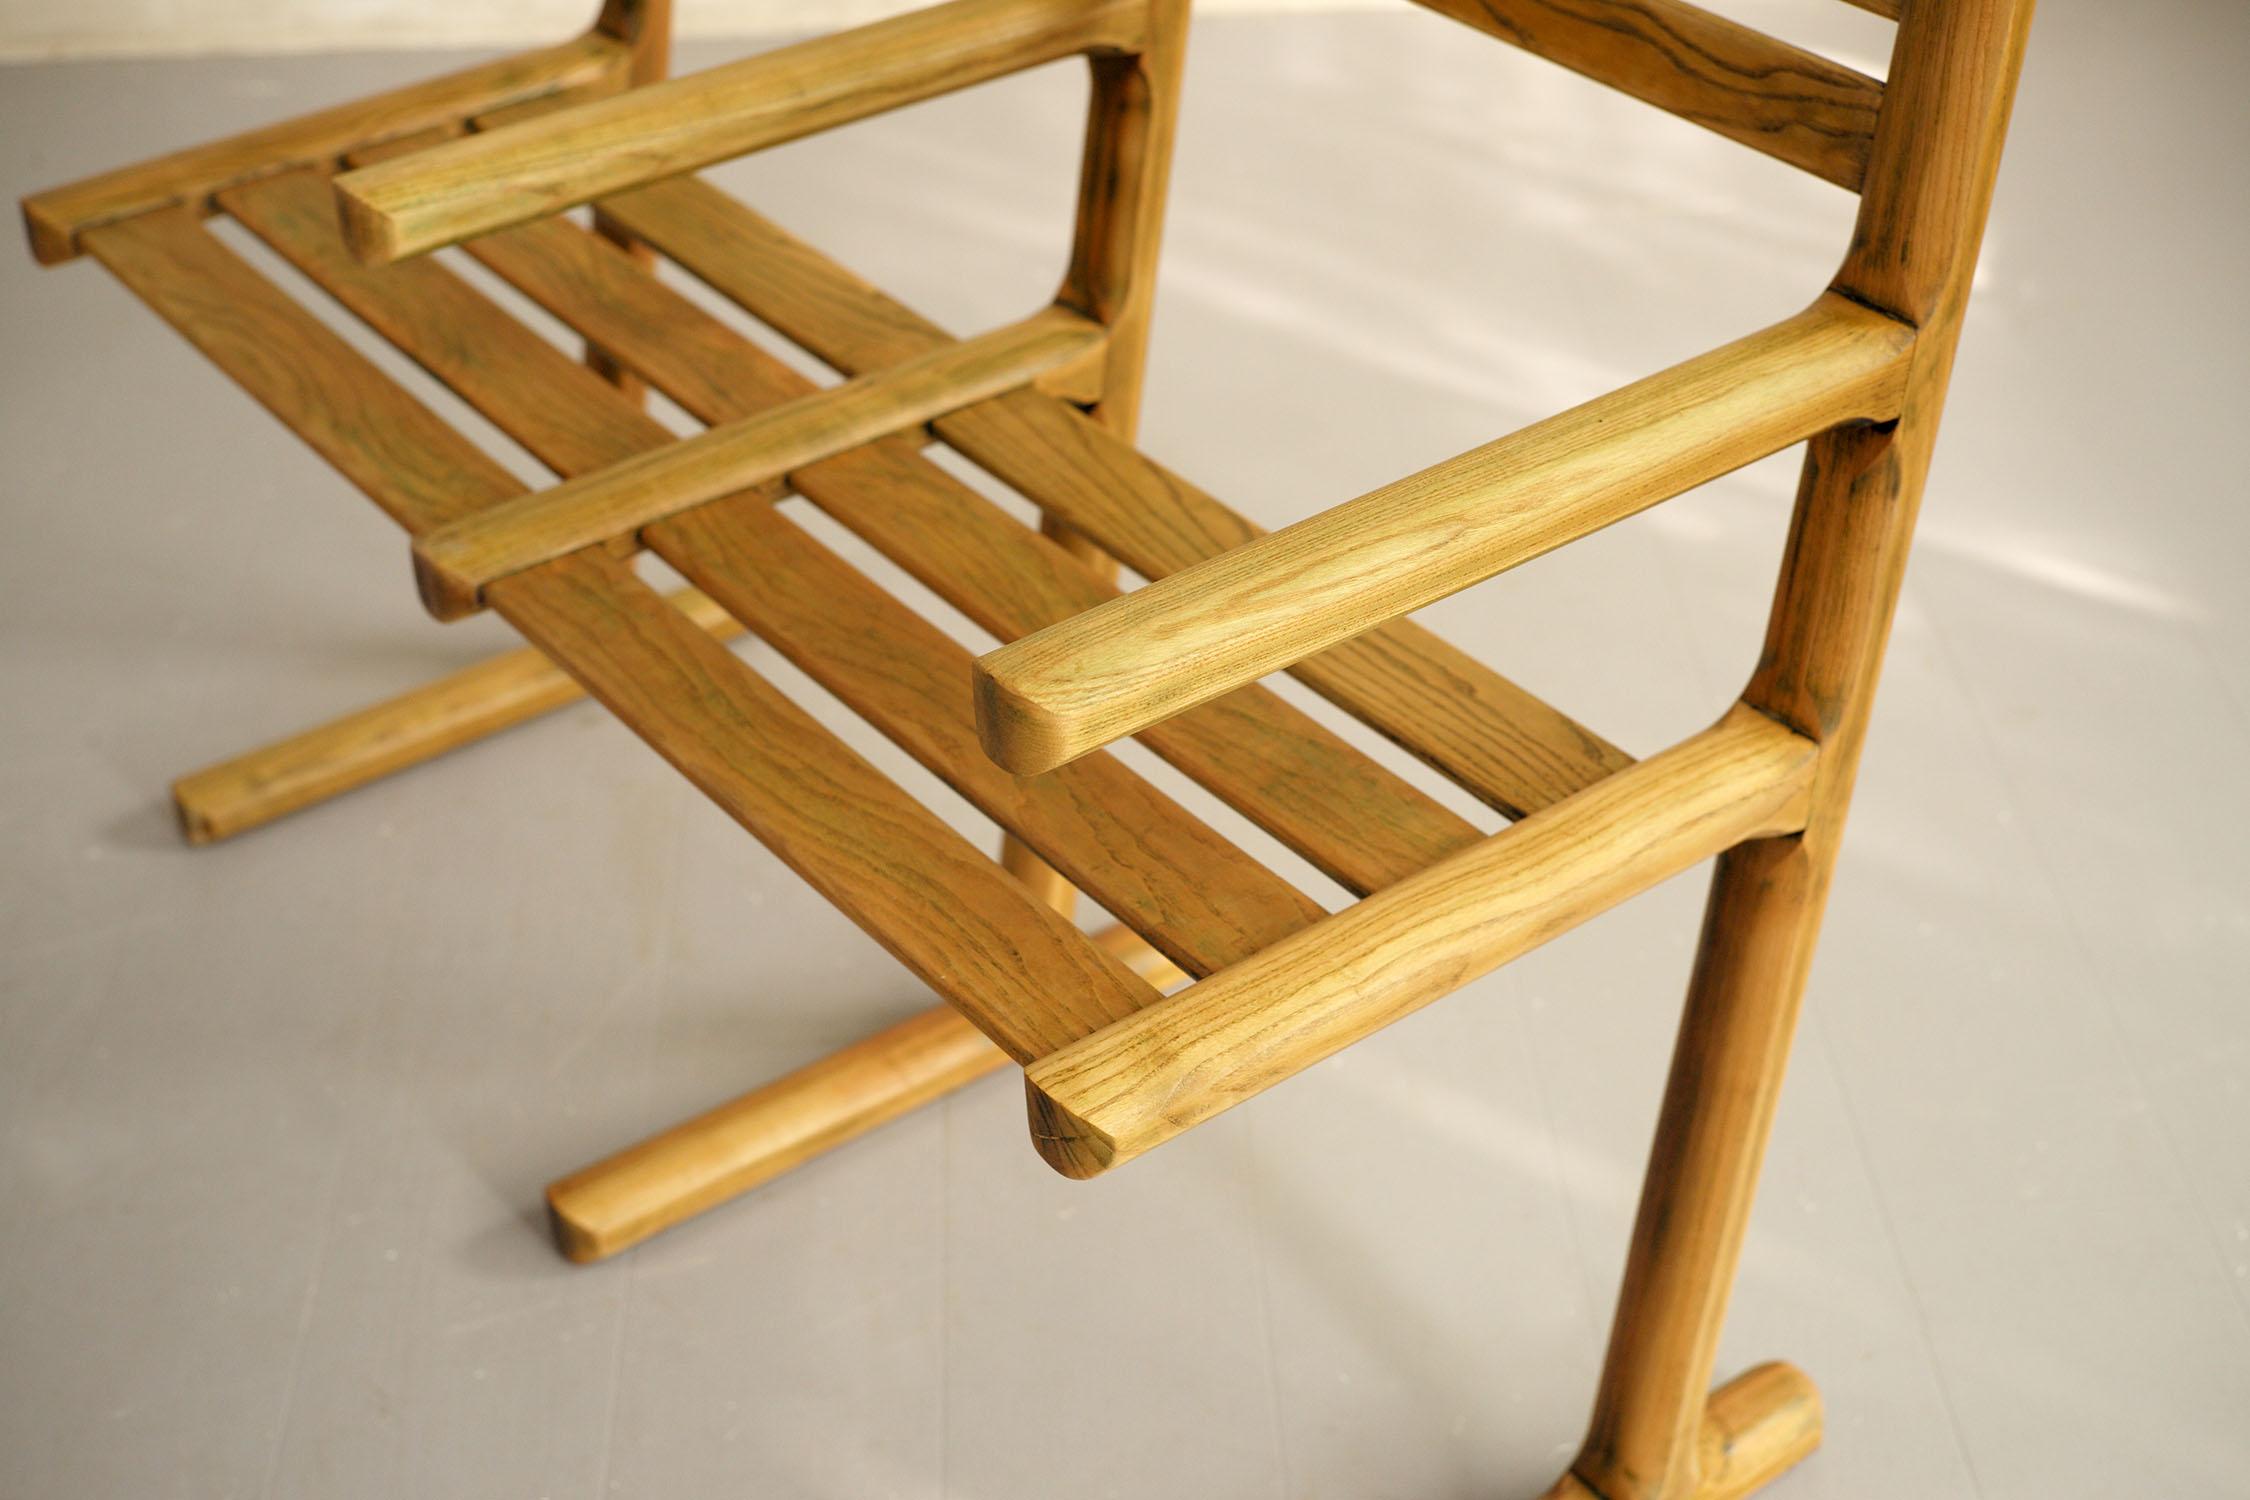 Set of 4 Chairs and 1 Wooden Bench, France, 1960 For Sale 4